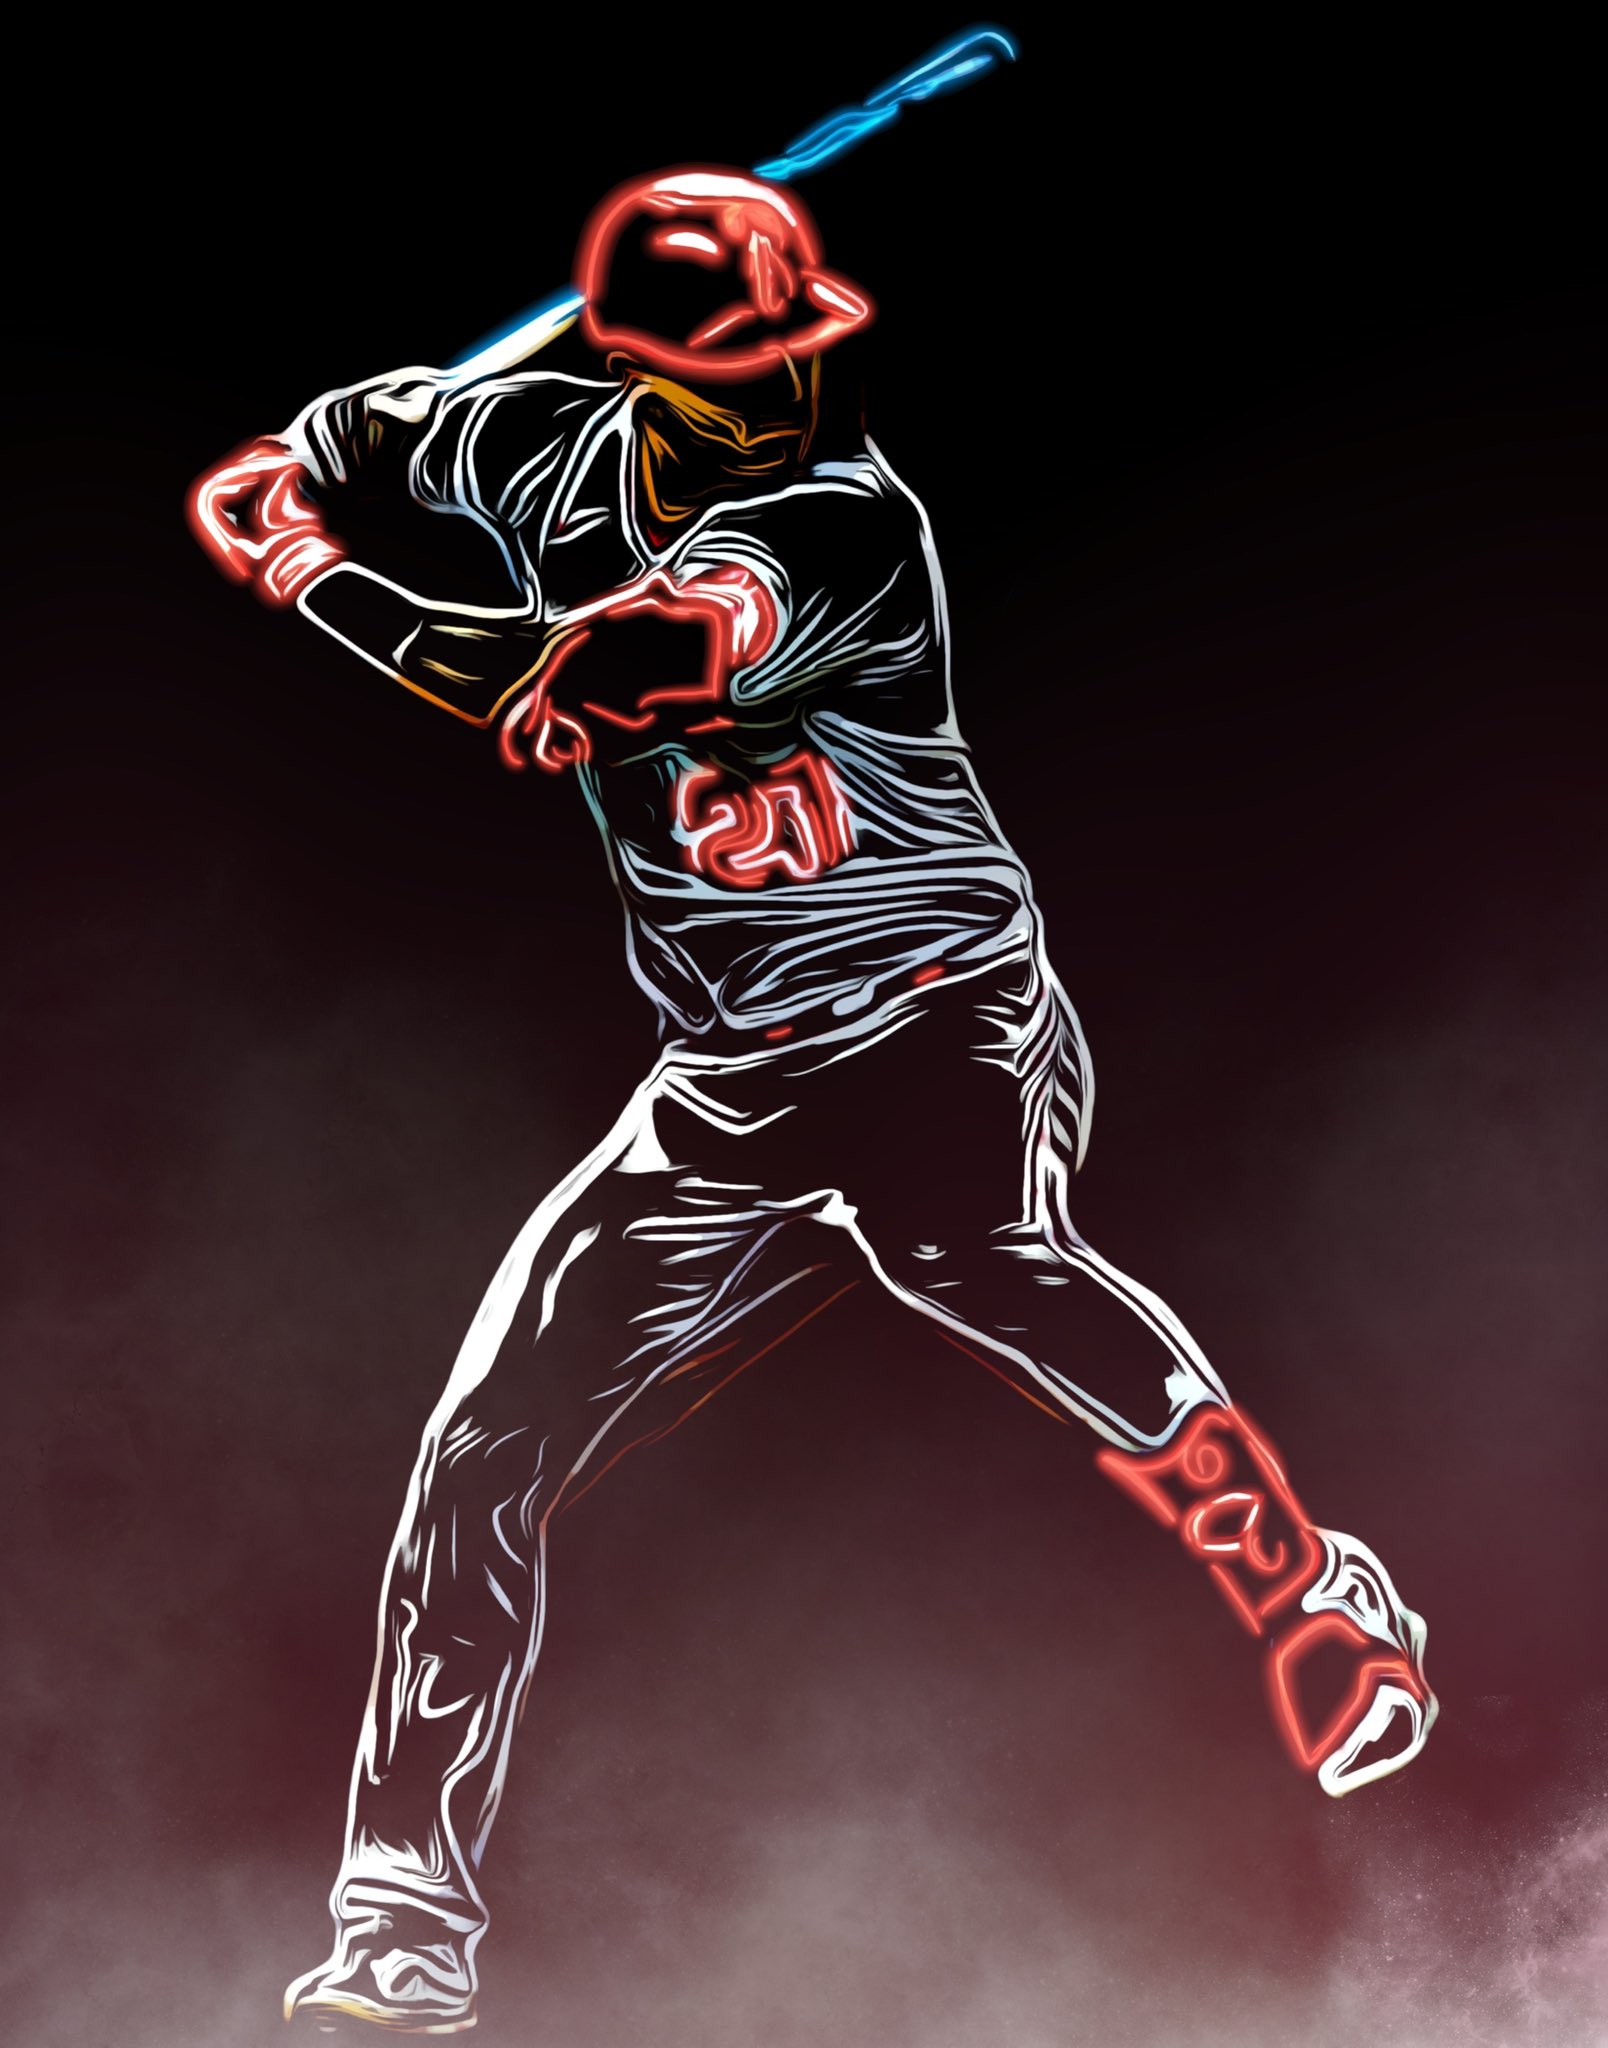 Art By James Ryan on X: Mike Trout 💥✍️ @MikeTrout